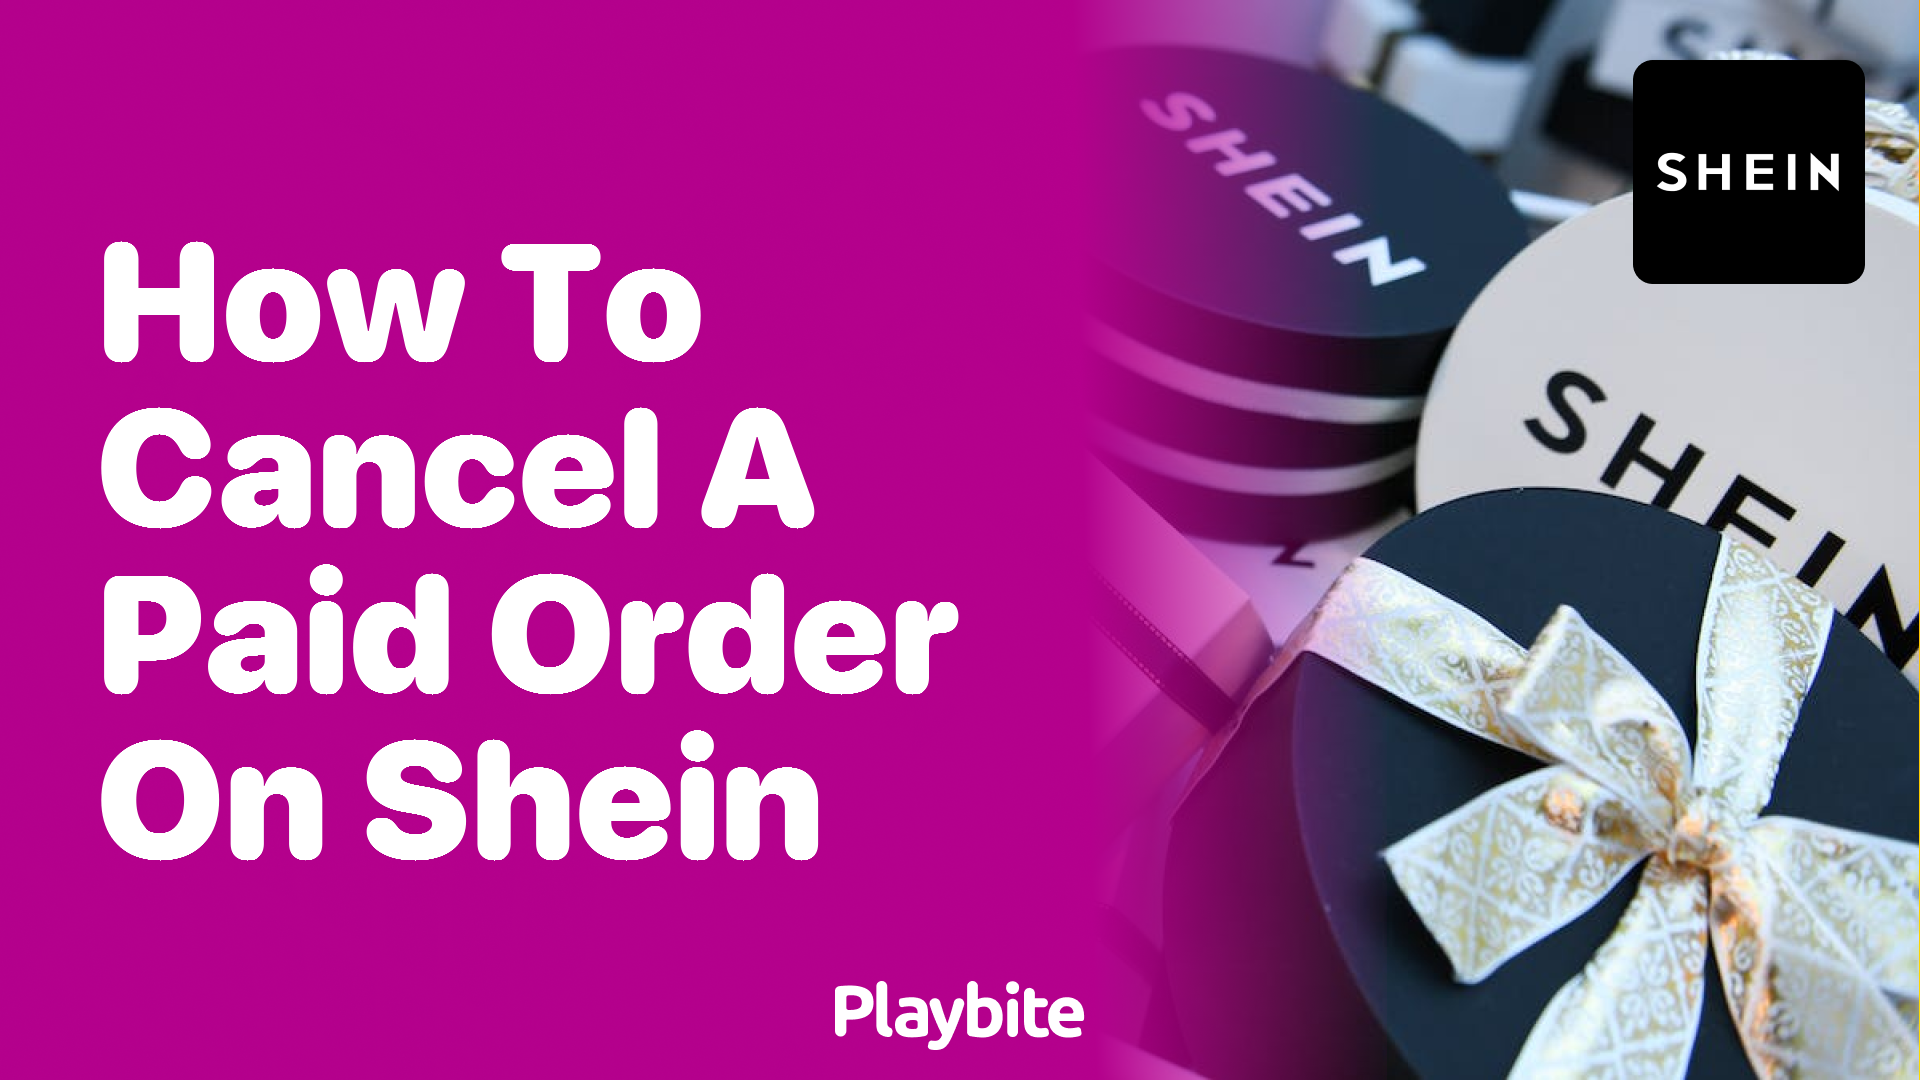 How to Cancel a Paid Order on SHEIN - Playbite